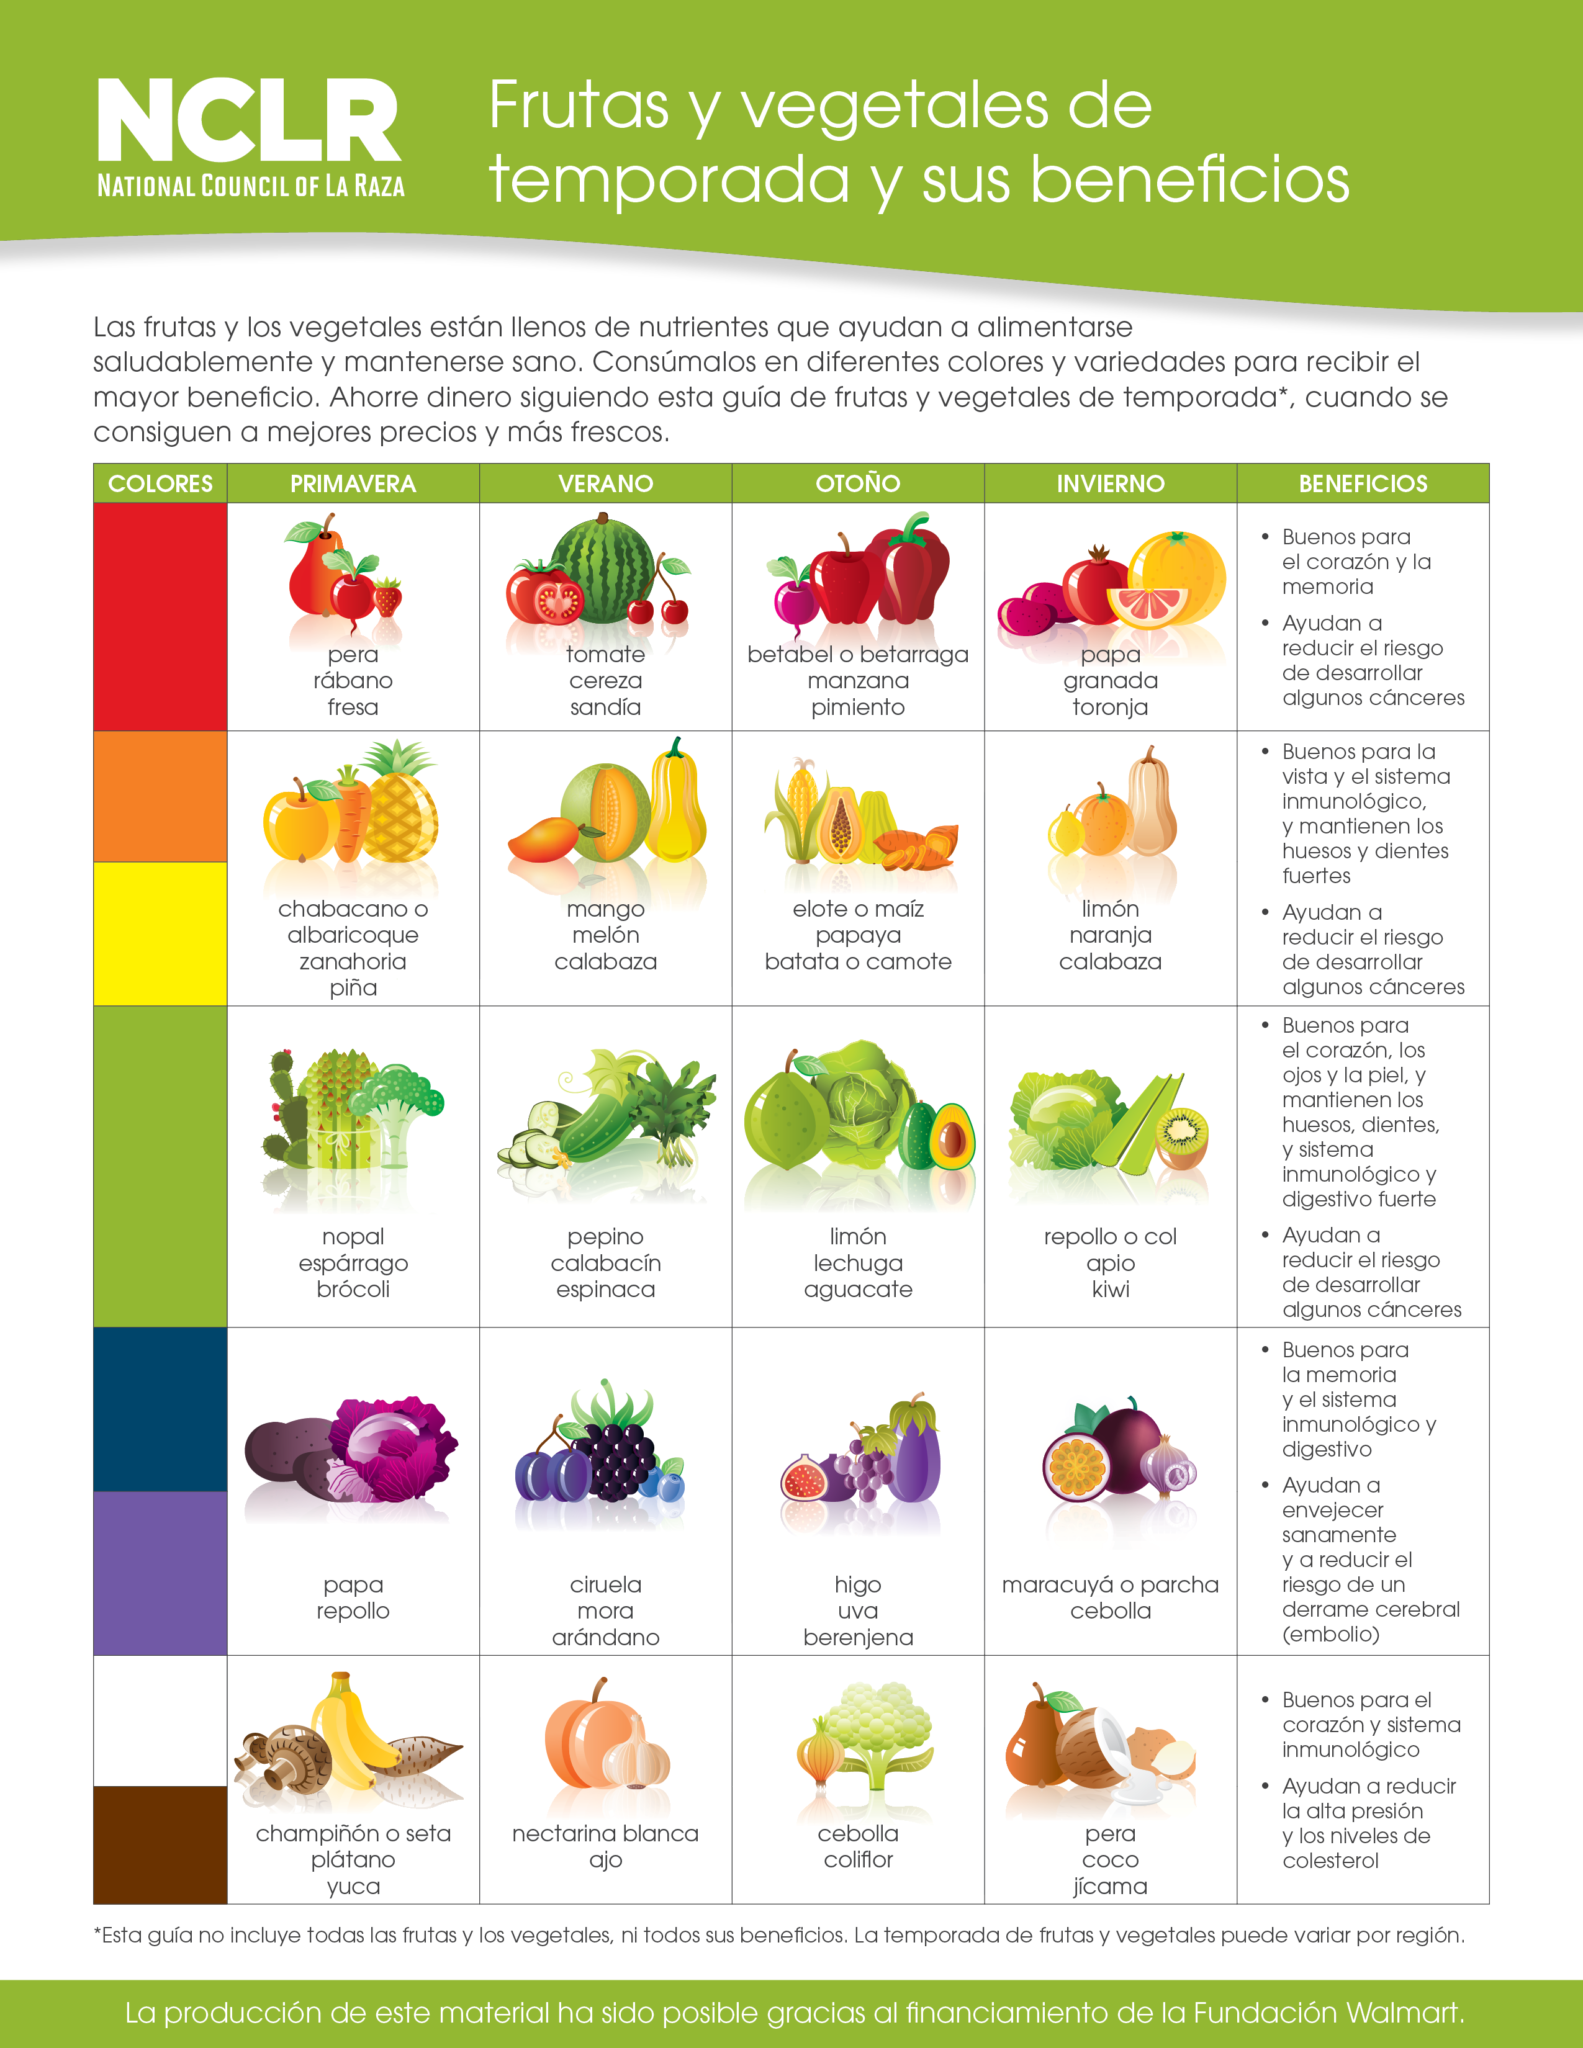 What Are the Benefits of Eating Seasonal Fruits and Vegetables?